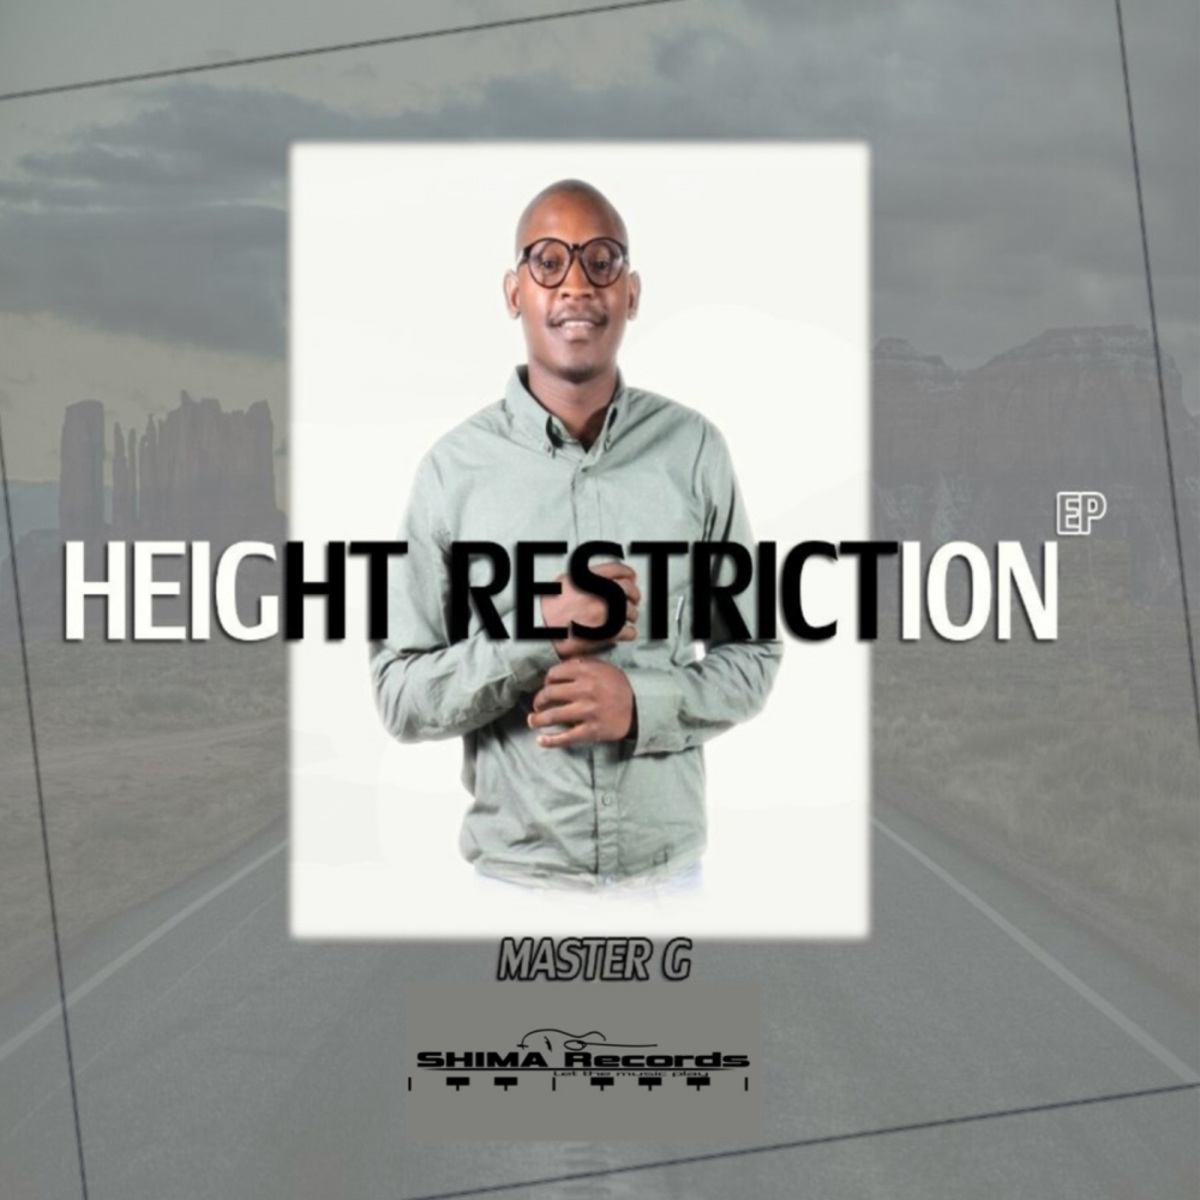 Master G - Height Restriction / SHIMA Records